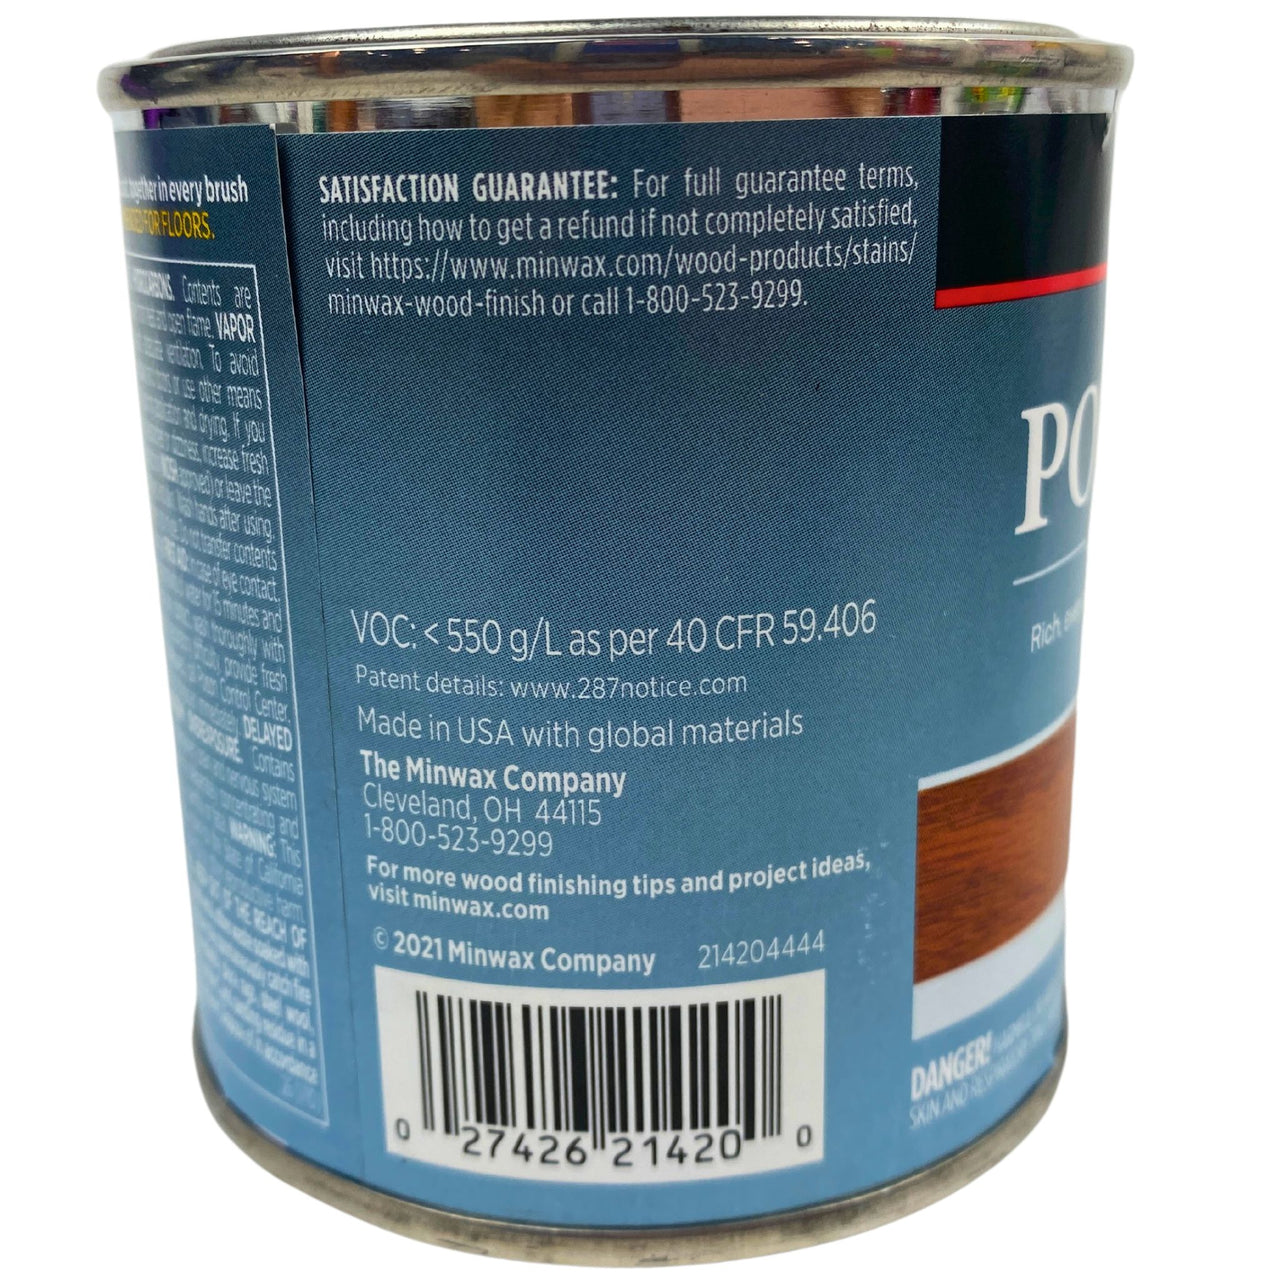 Minwax Premium Oil Since 1904 Polyshades Stain + Poly In One Step Gloss Pecan 